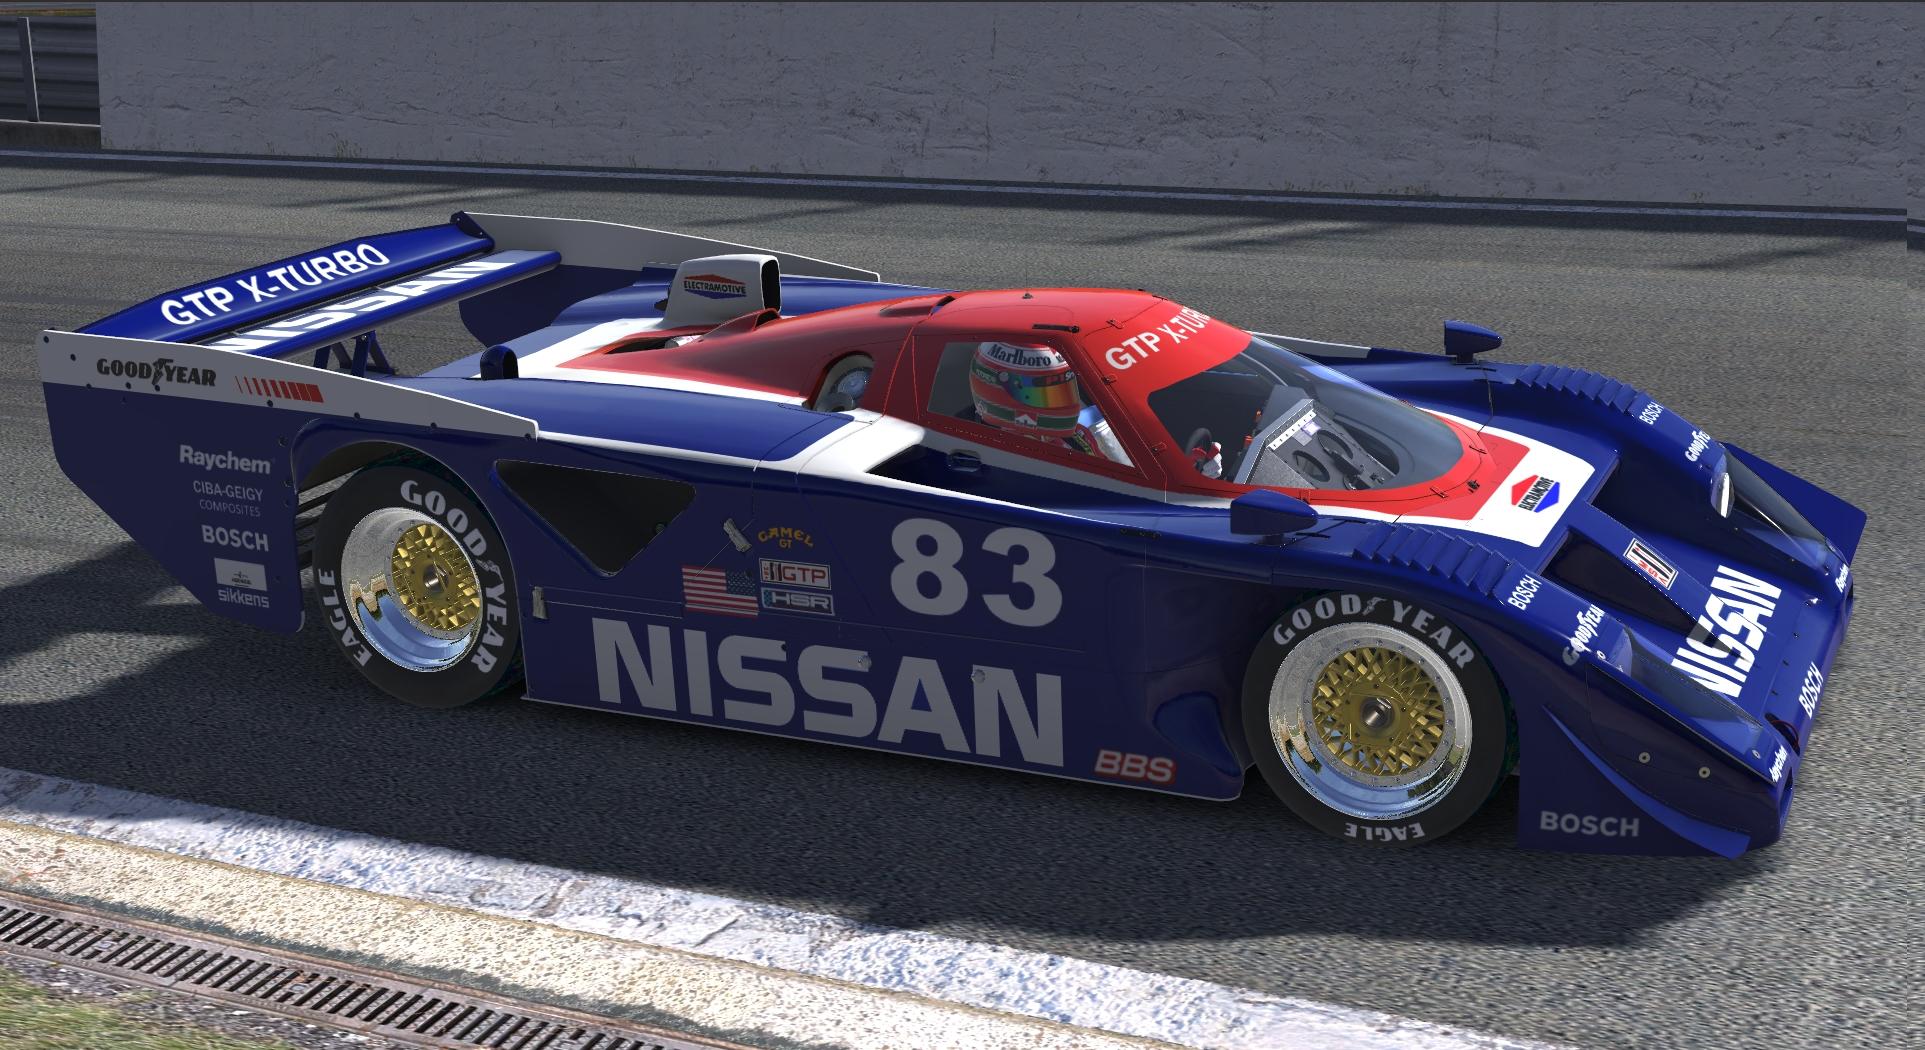 Preview of 1987 Nissan GTP zx-turbo by John Paquin